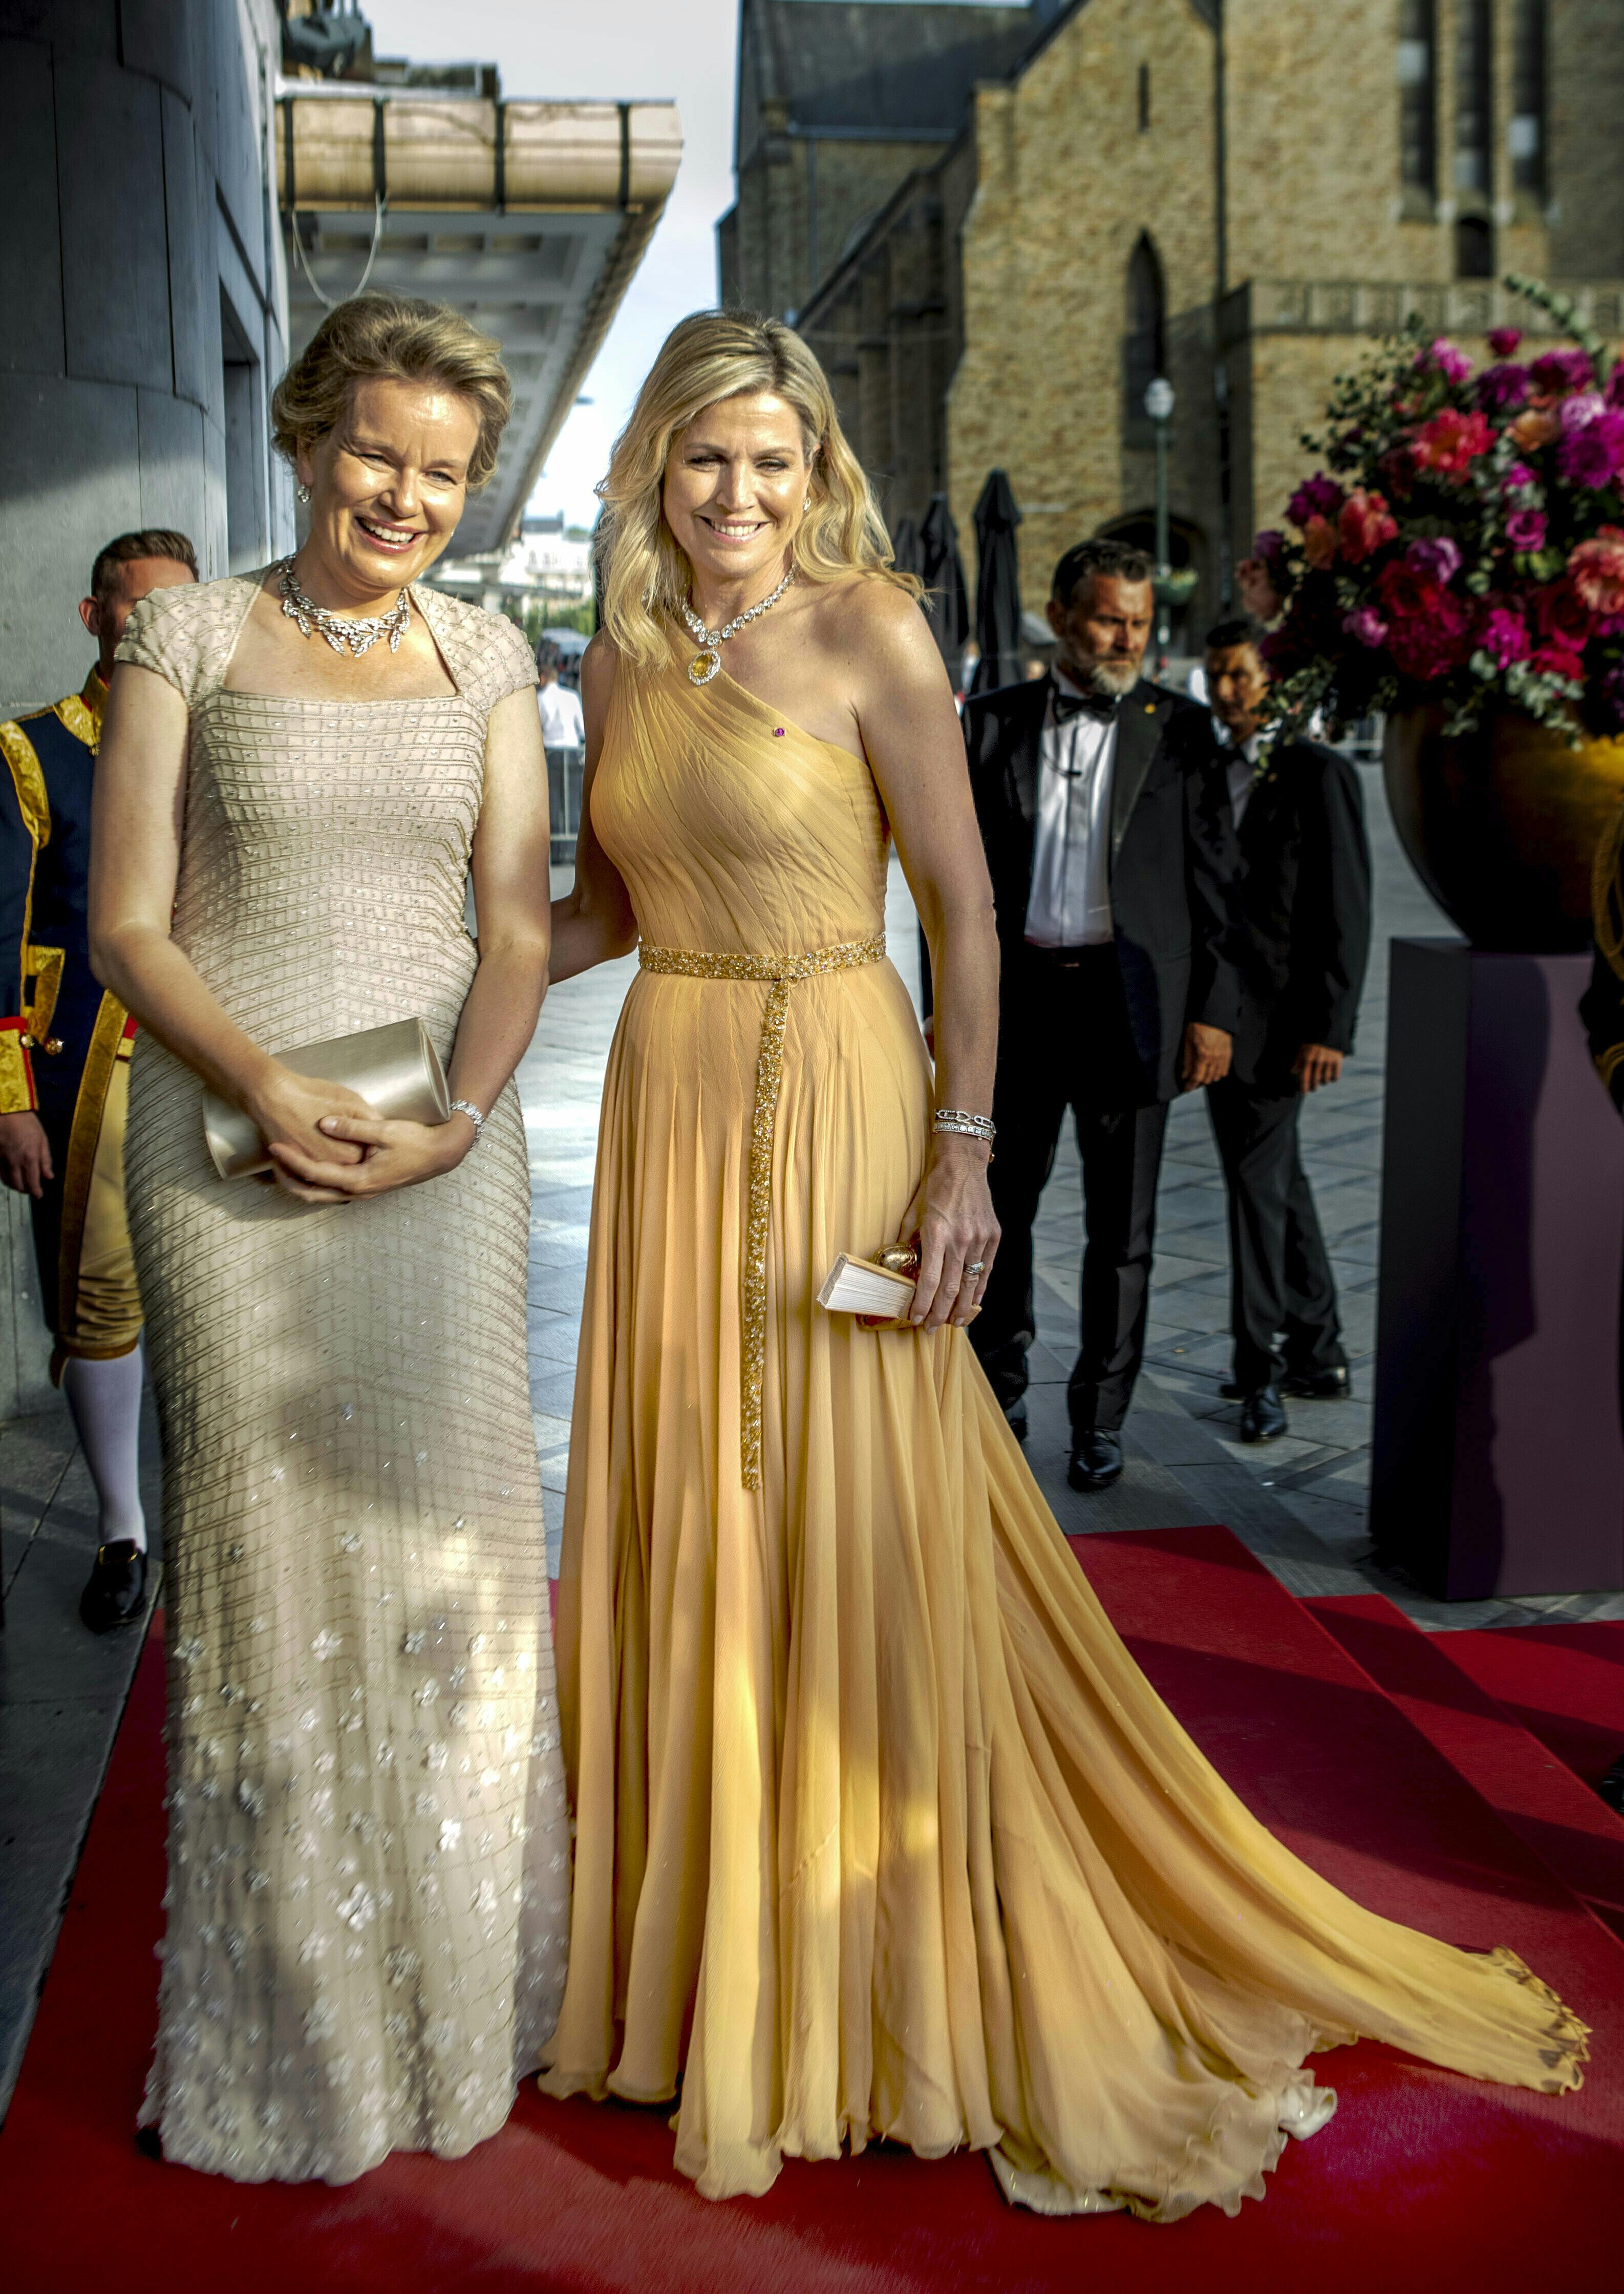 Queen Maxima of The Netherlands and Queen Mathilde of Belgium arrive at the culture house Flagey in Brussel, on June 21, 2023, for the contra presentation, on the 2nd of a 3 days State visit from The Netherlands to Belgium Photo by: Albert Nieboer/picture-alliance/dpa/AP Images